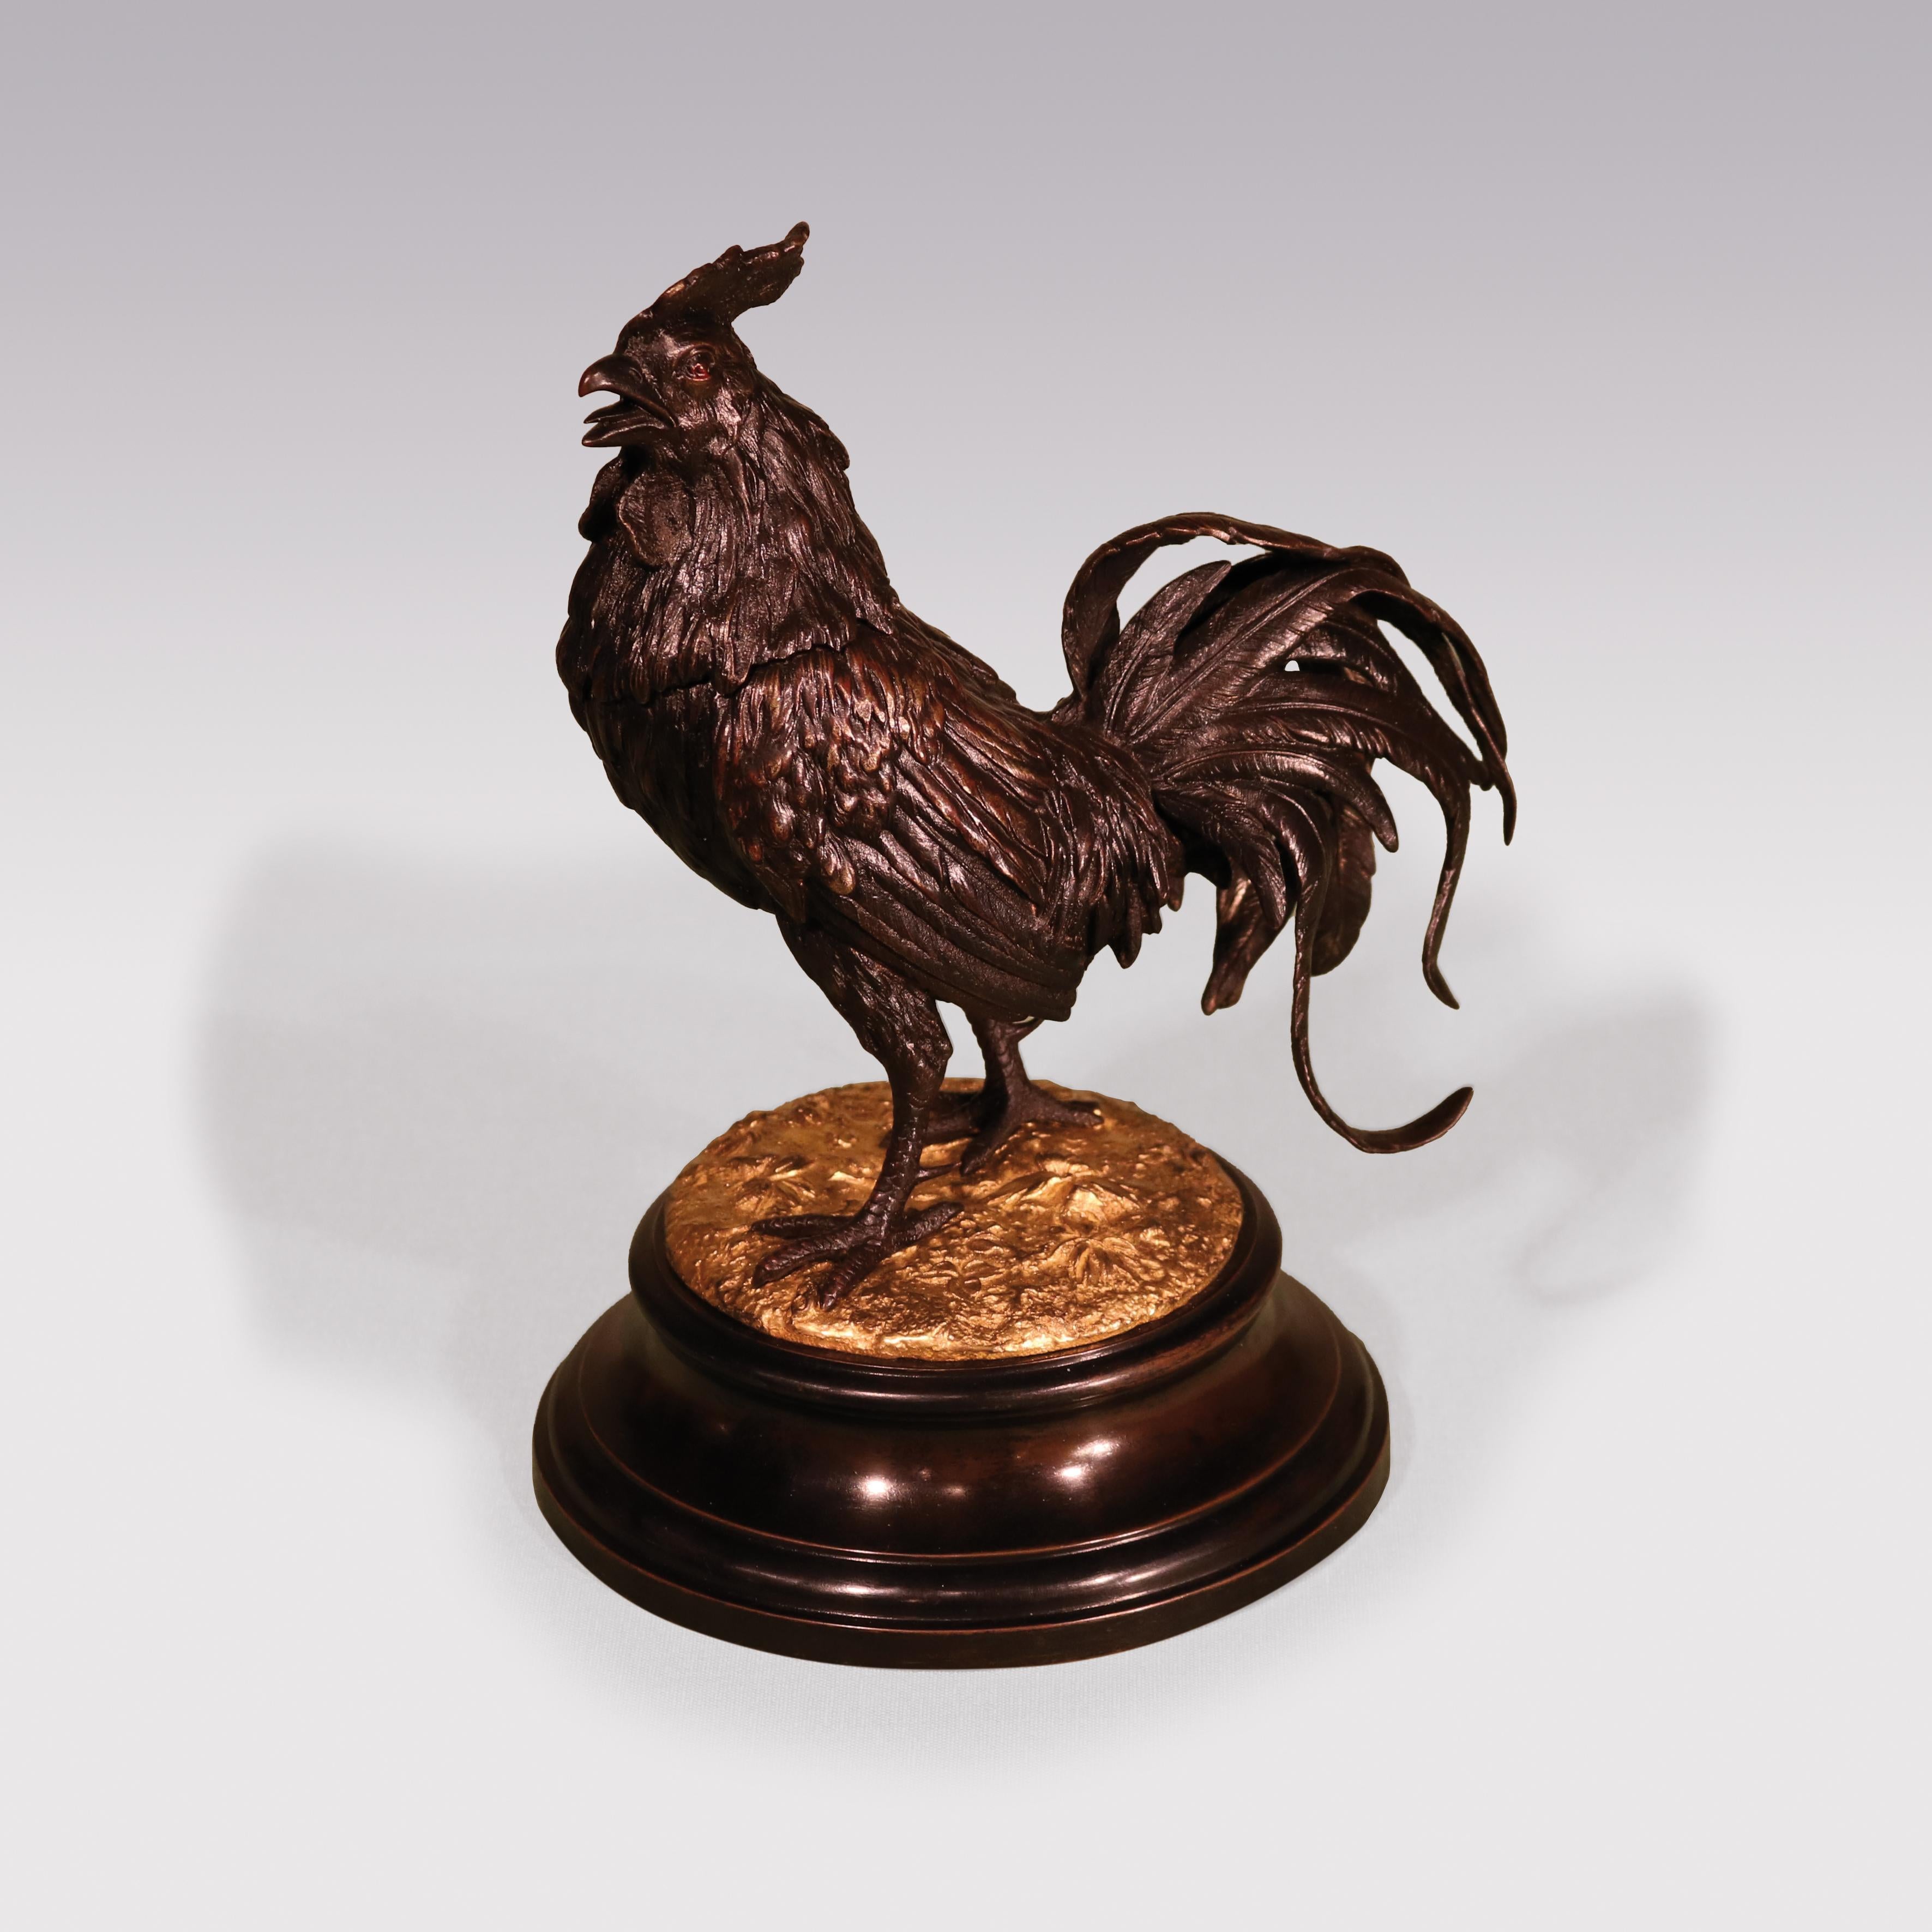 An unusual mid 19th Century bronze & ormolu Inkwell in the form of well-cast Cockerel with lifting head, spurs and flamboyant tail feathers, raised on moulded socle.